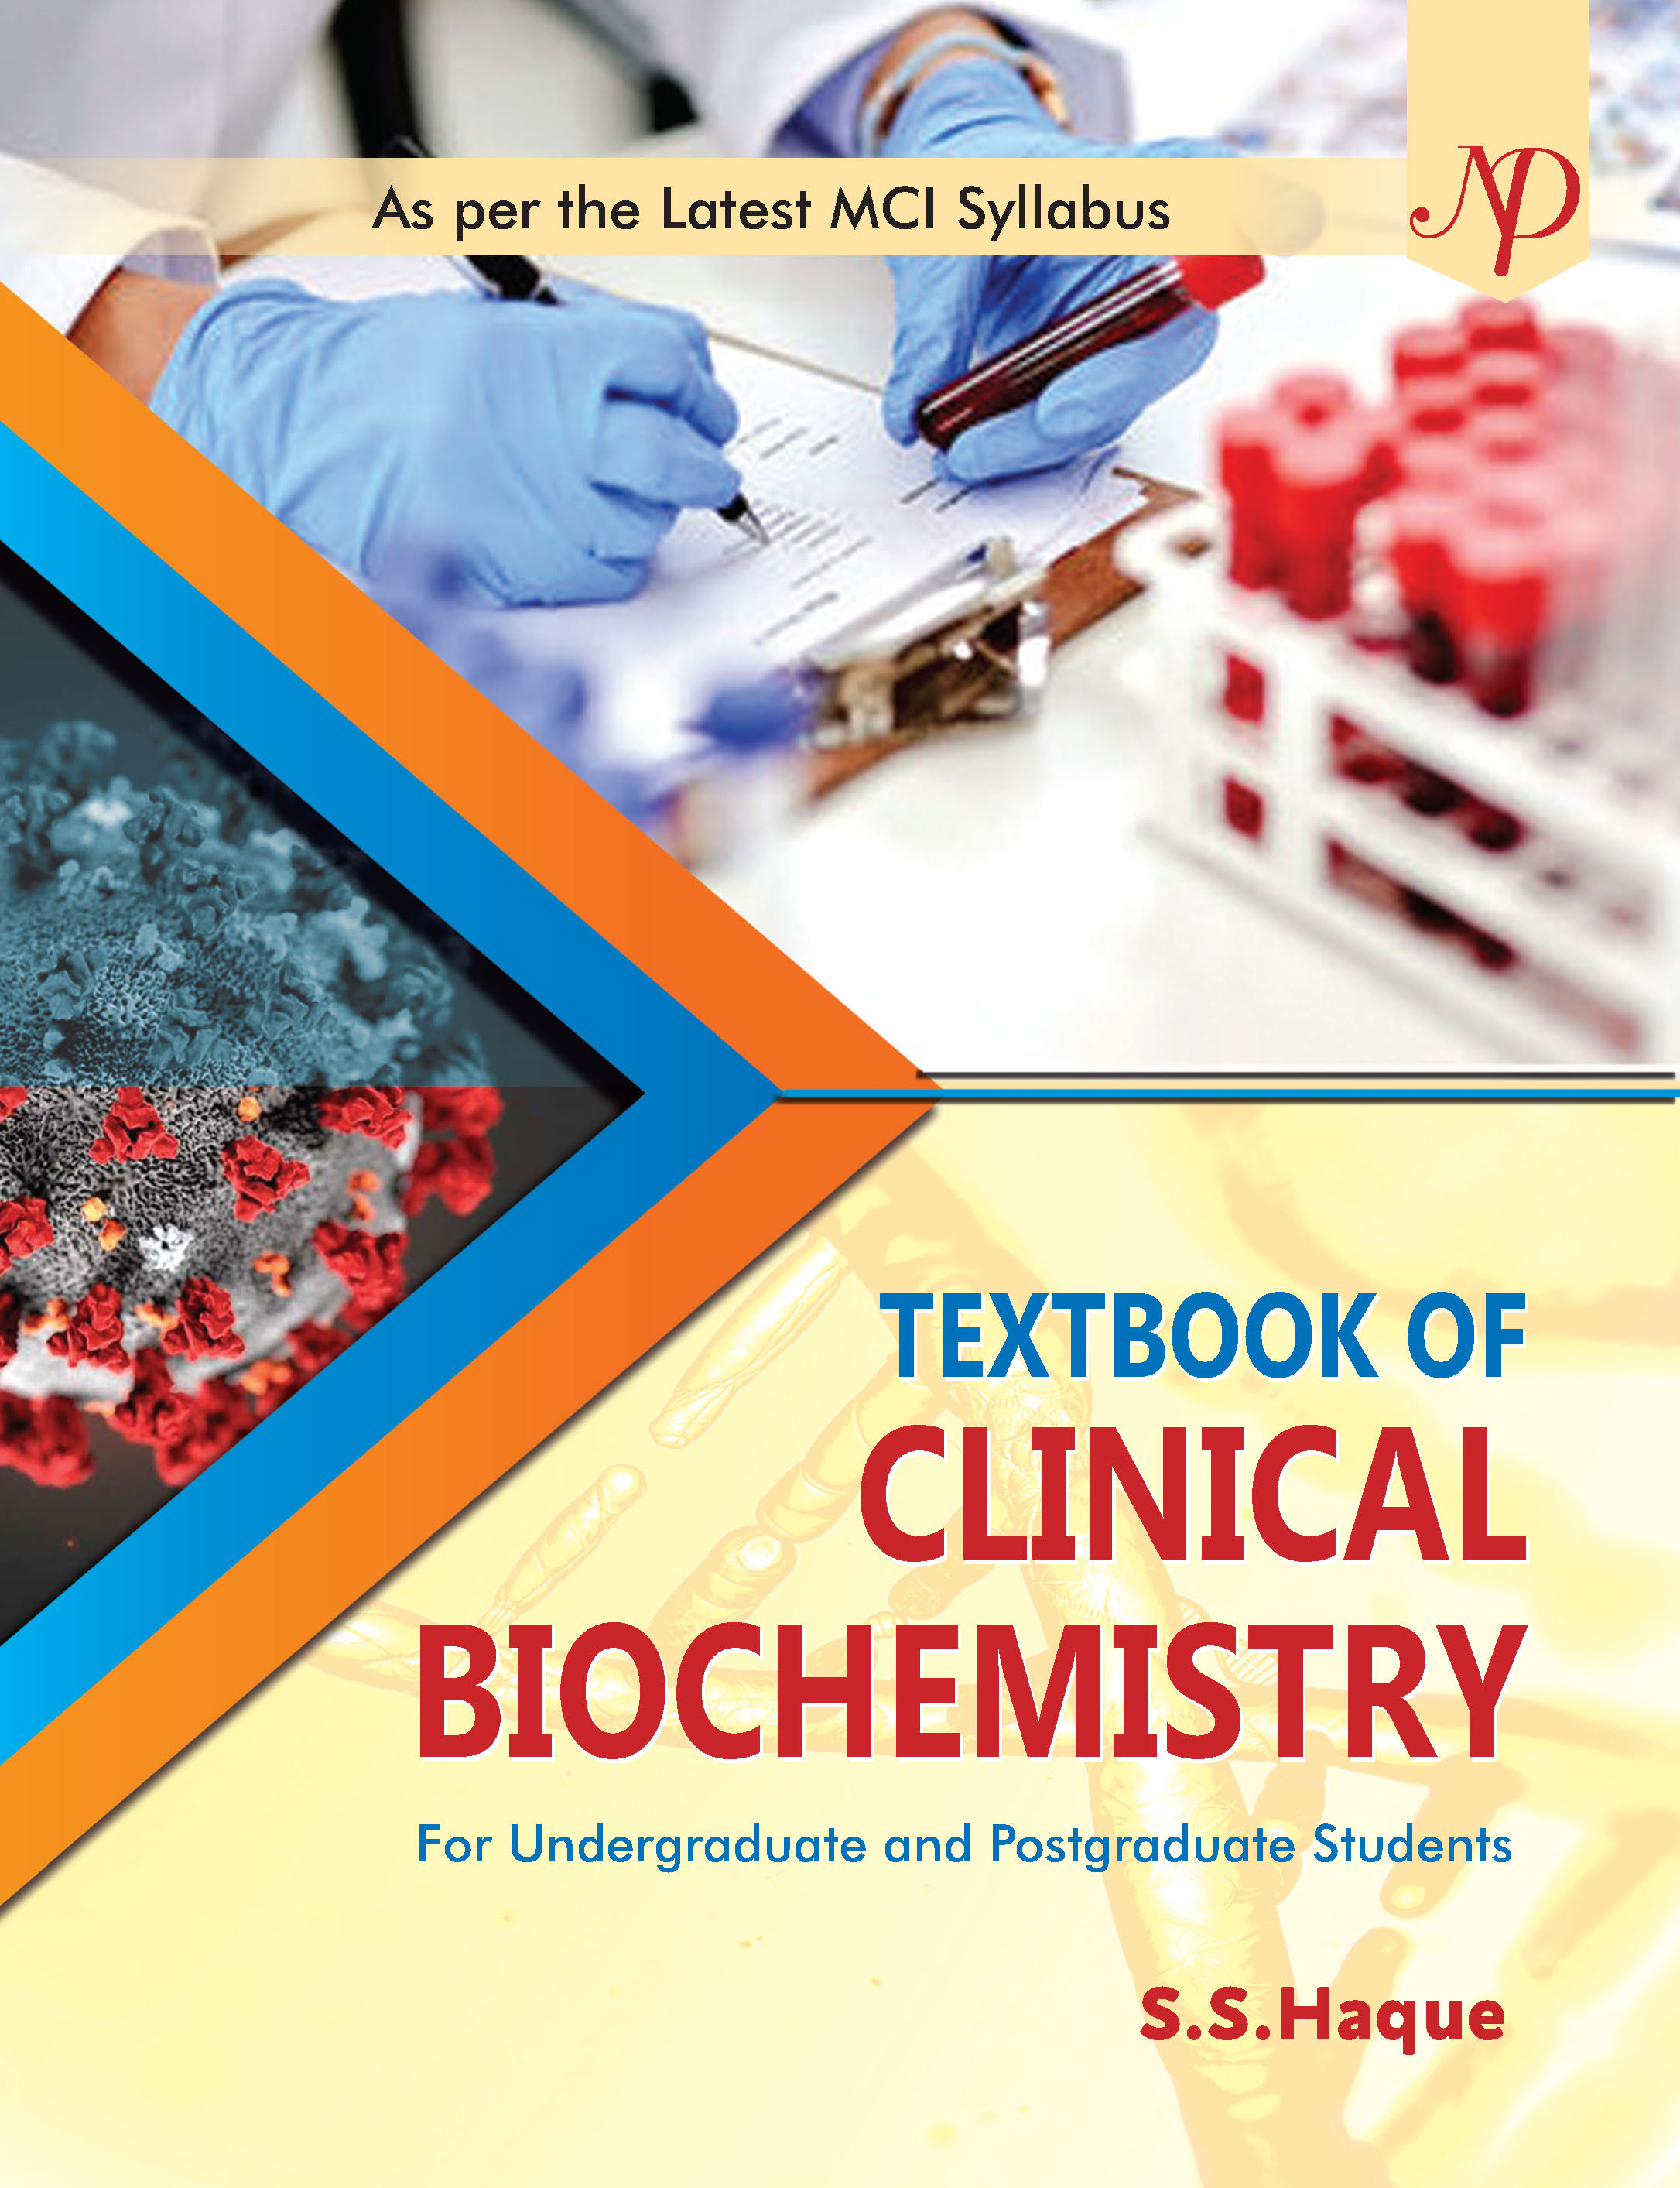 Textbook of Clinical Biochemistry: A Comprehensive Review of Clinical Biochemistry For Undergraduate and Postgraduate Students (As per the Latest MCI